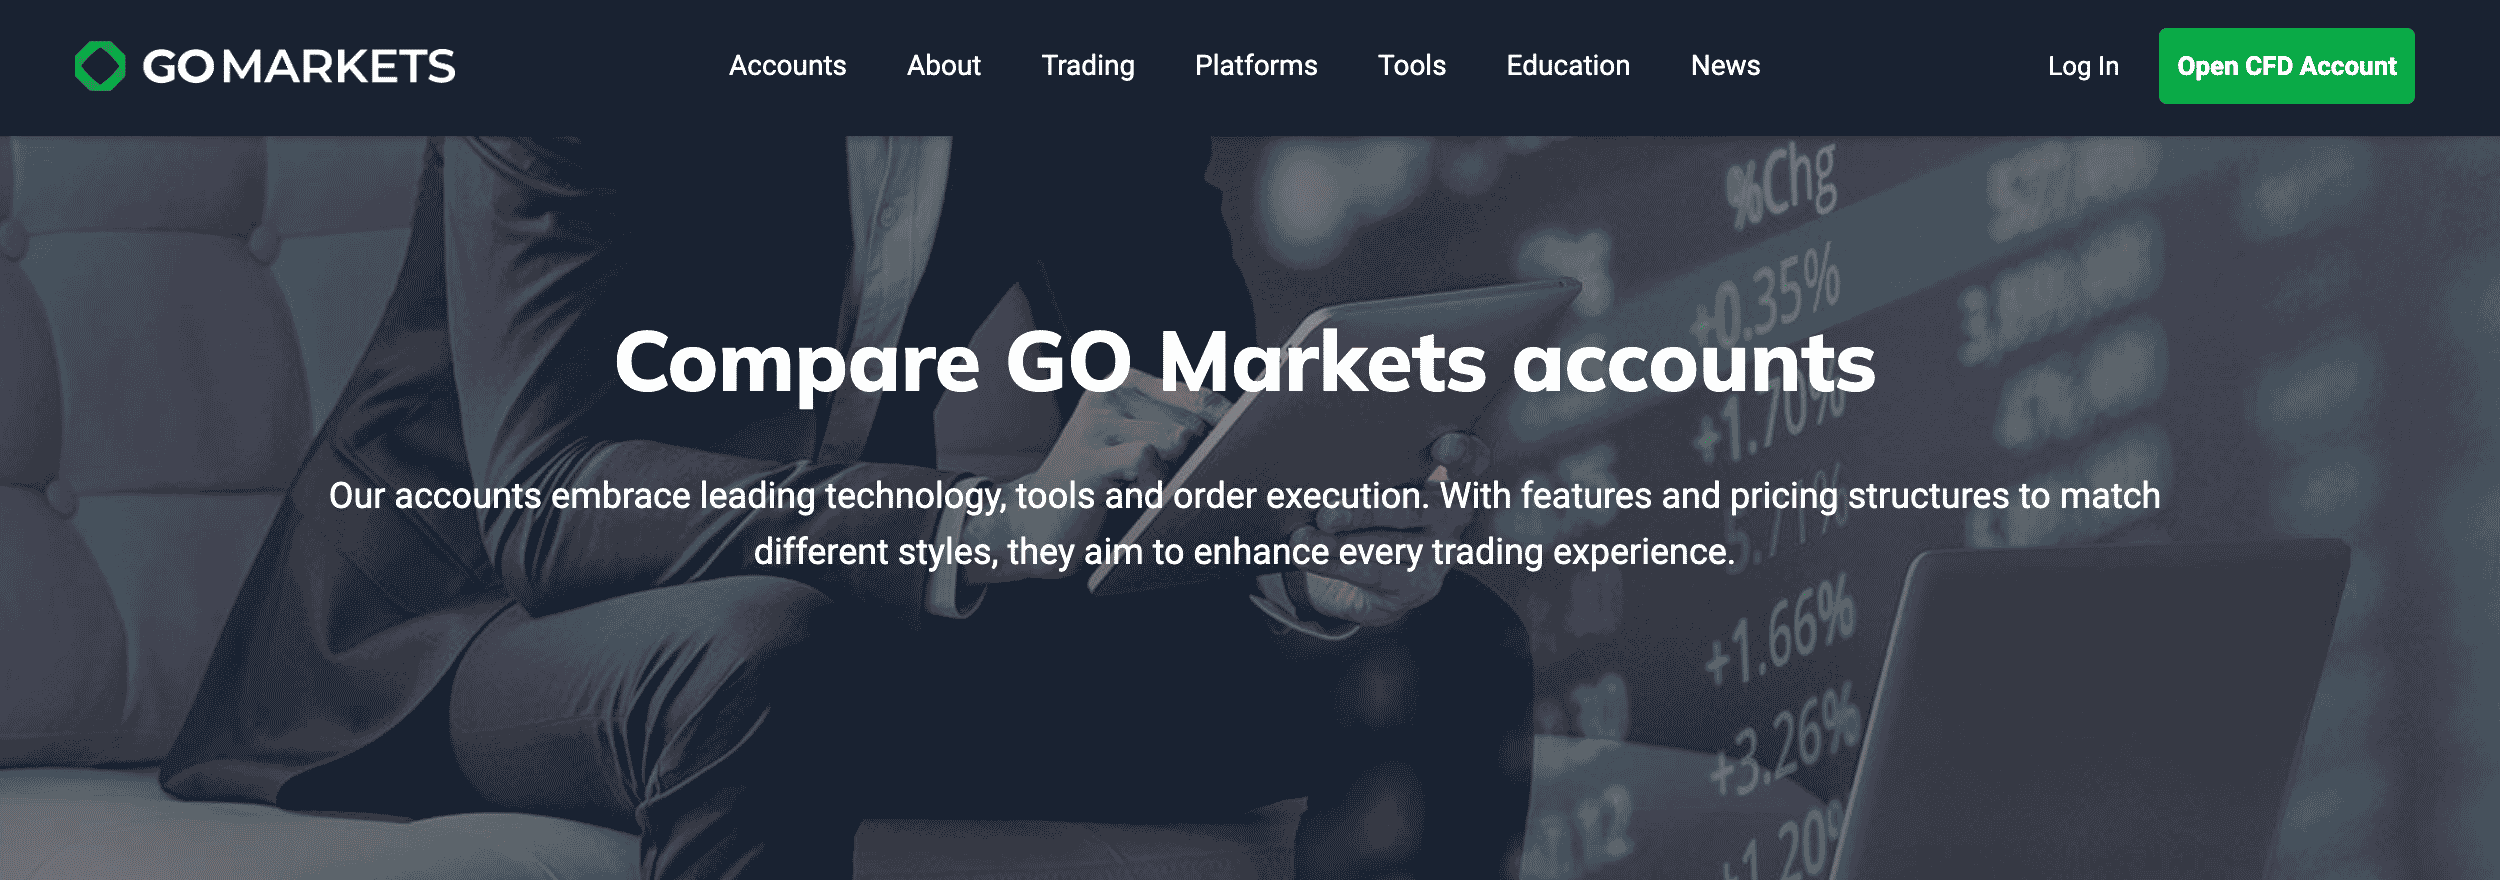 GO Markets Account Types and Features